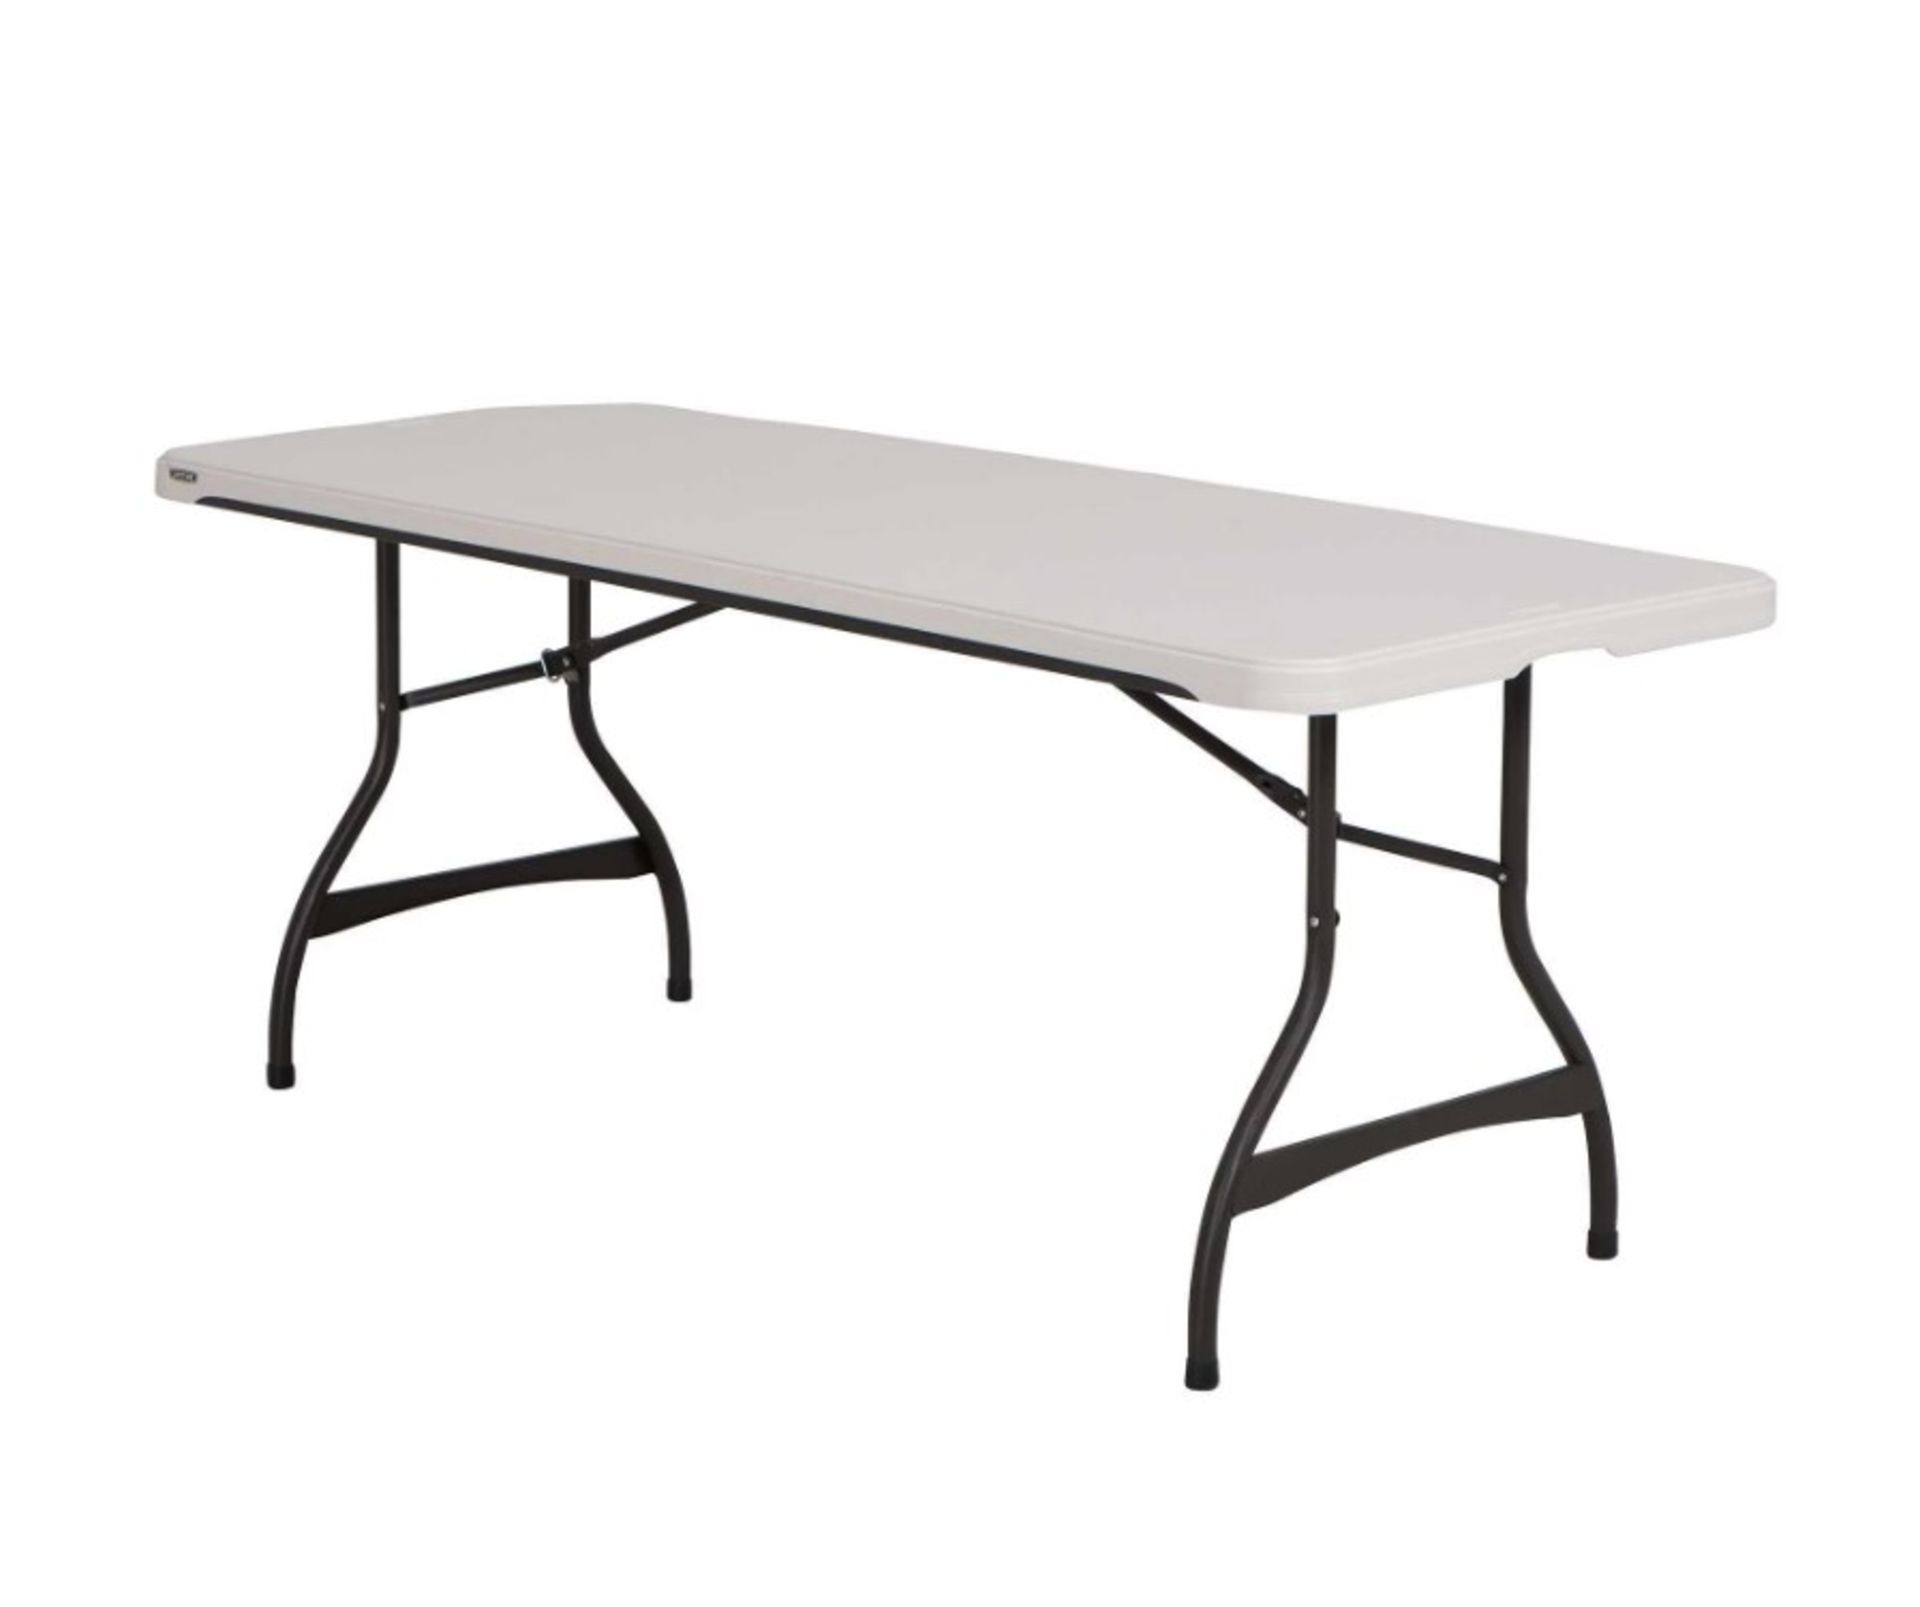 1 LIFETIME 6FT FOLD IN HALF COMMERCIAL GRADE TABLE RRP Â£89